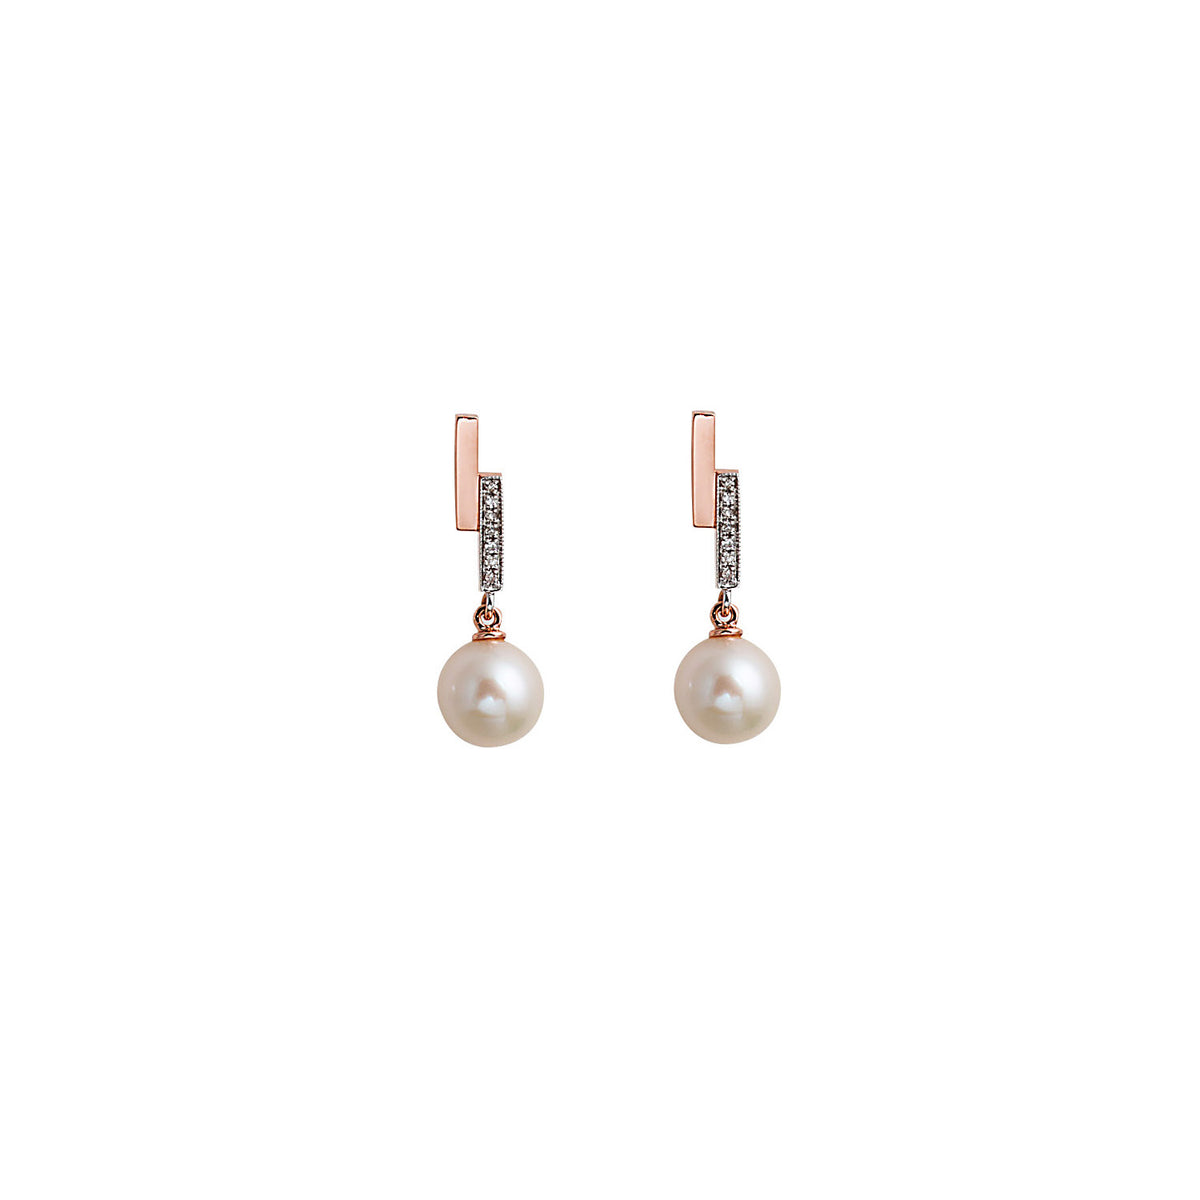 Pearl Earring. Earrings. 18K gold earring. Fresh water pearl. White Gold, yellow gold, rose gold. Perfect Gift. Earring gift. Hanging Pearl. Chain Erring. Fine jewelry. Anatol. Σκουλαρίκι χρυσό. Σκουλαρίκι  με μαργαριτάρι. Σκουλαρίκι αλυσίδα. Σκουλαρίκι με πέρλα. Athens.